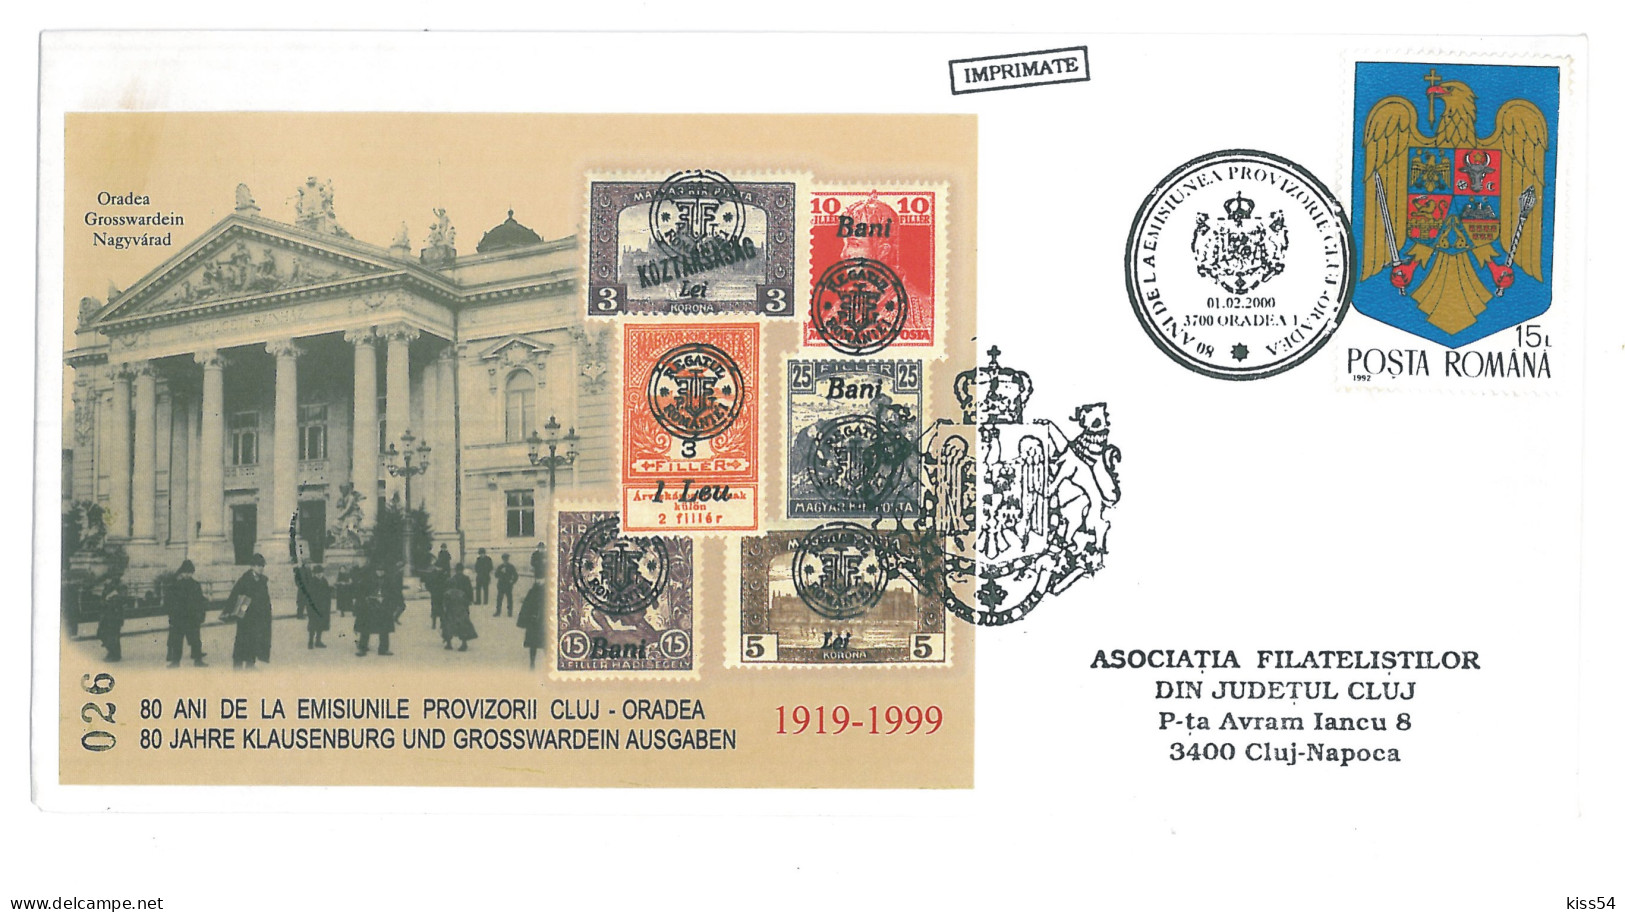 COV 91 - 3030 80 Years Since The Cluj-Oradea Philatelic Edition, Romania - Cover - Used - 2000 - Paquetes Postales